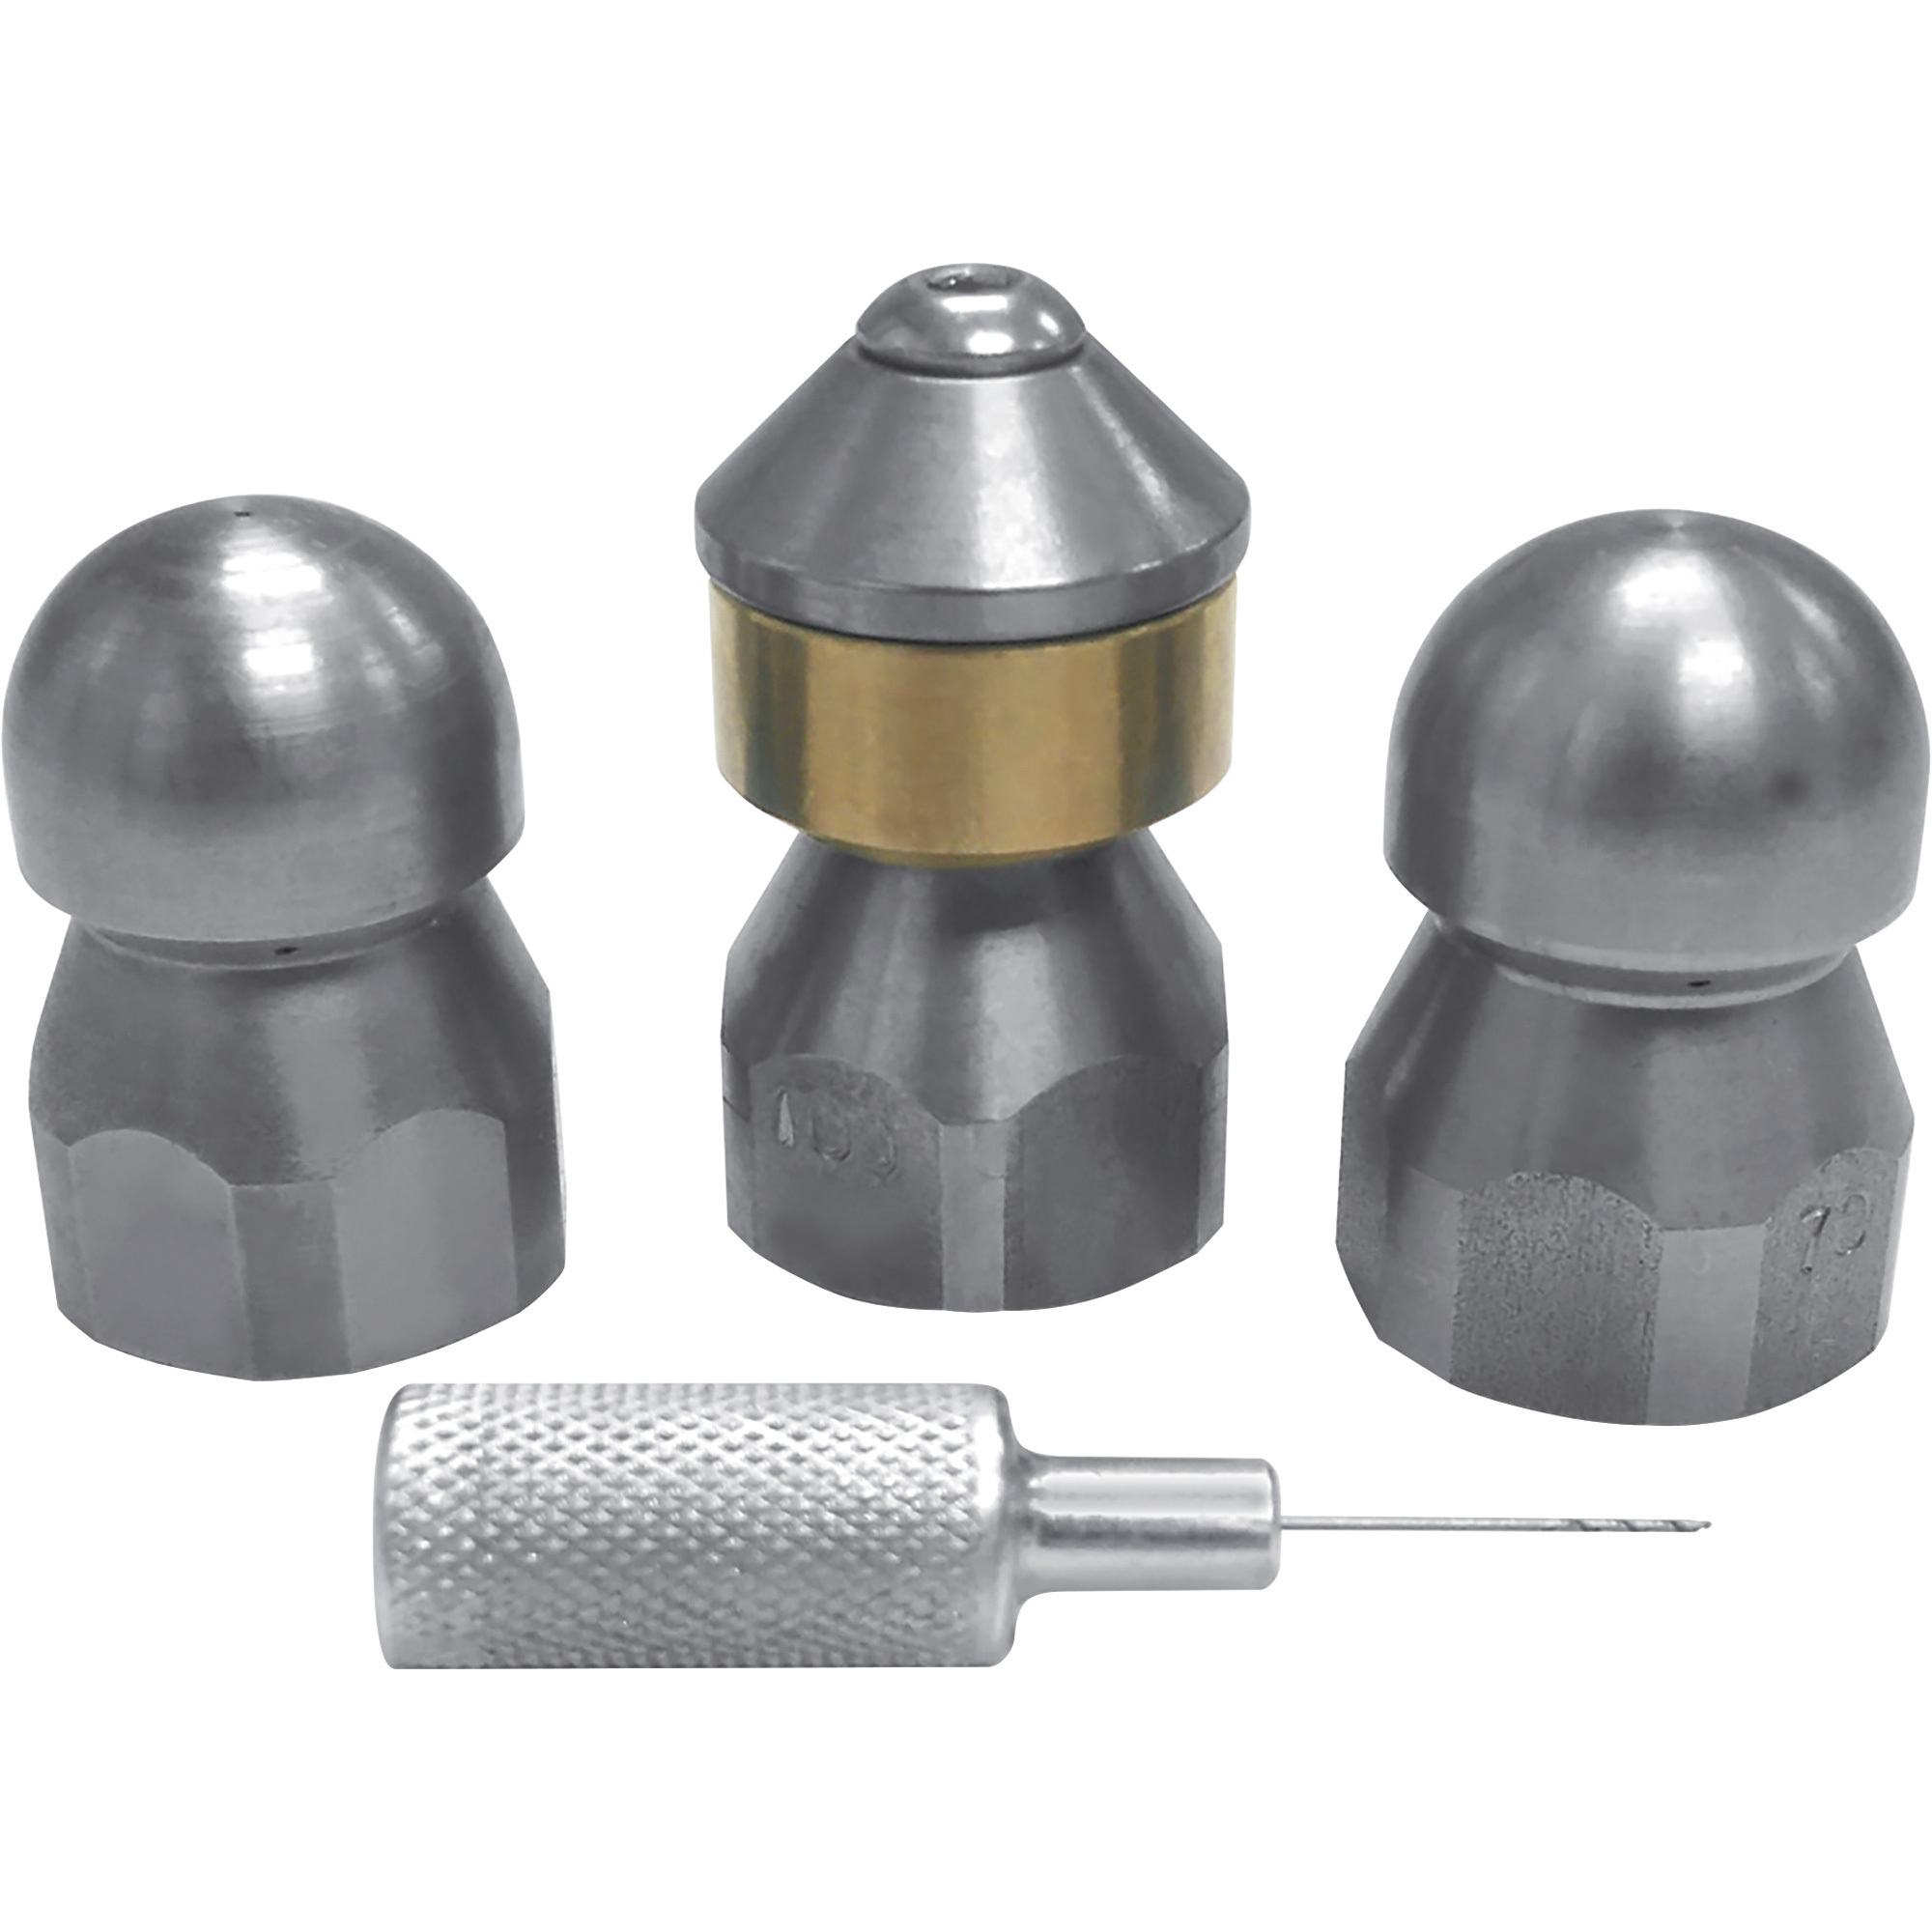 DTE Universal Sewer Jetting Nozzle Kit, 4-Piece, 3/8Inch